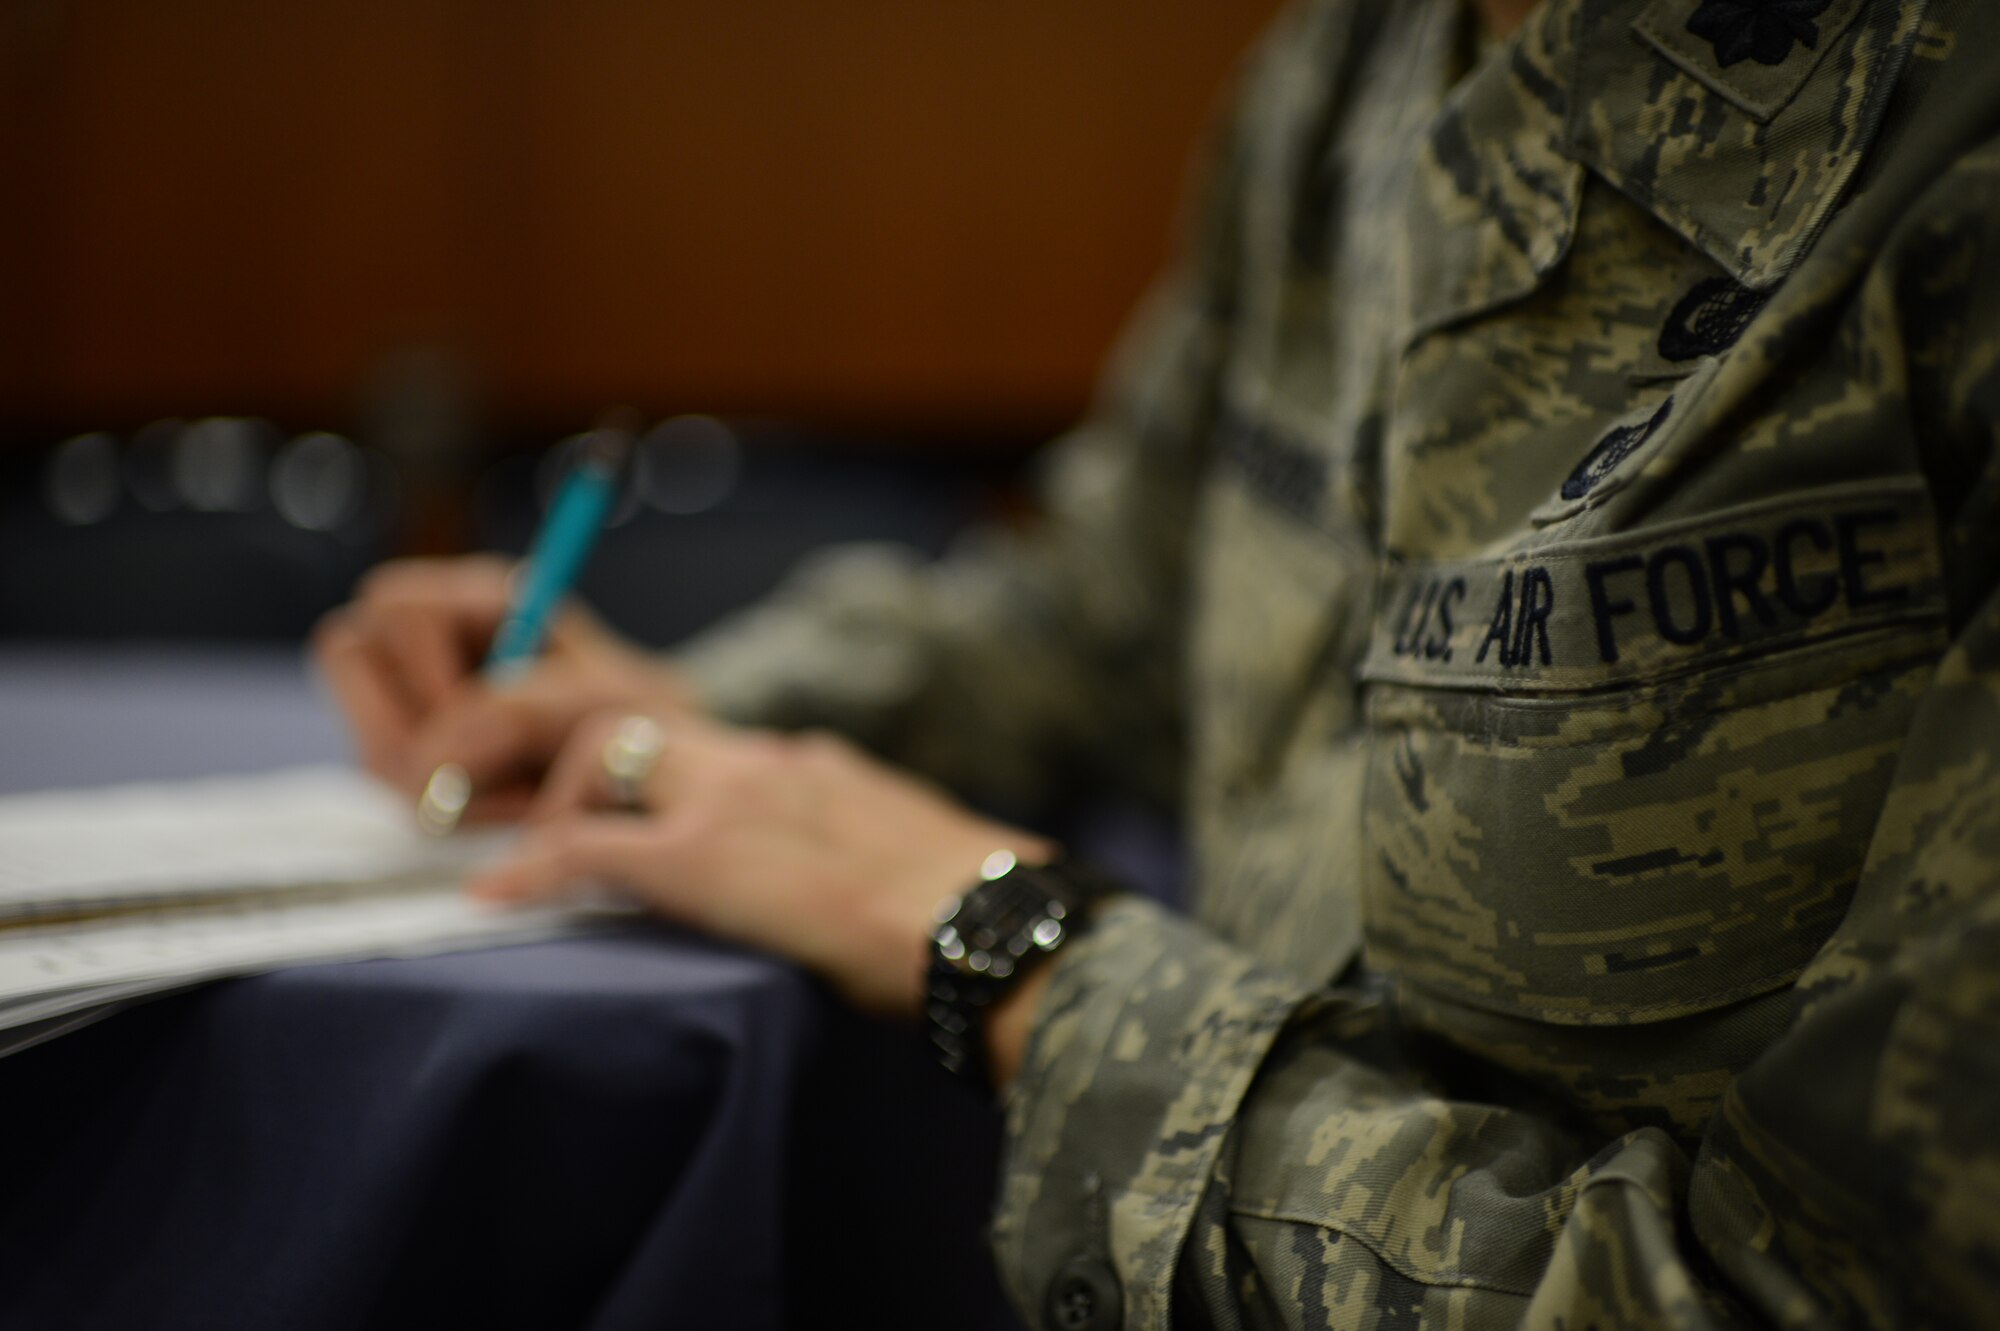 SPANGDAHLEM AIR BASE, Germany – A member from the Air Force Sexual Assault Prevention & Response Headquarters, located in the Pentagon, takes notes of comments and suggestions made by Spangdahlem Airmen in an Air Force-wide focus group in combating sexual assault Sept. 26, 2013. The mission of the groups was to hear what the Airmen think are the problems and how they think we can lessen these problems. (U.S. Air Force photo by Airman 1st Class Gustavo Castillo/Released)